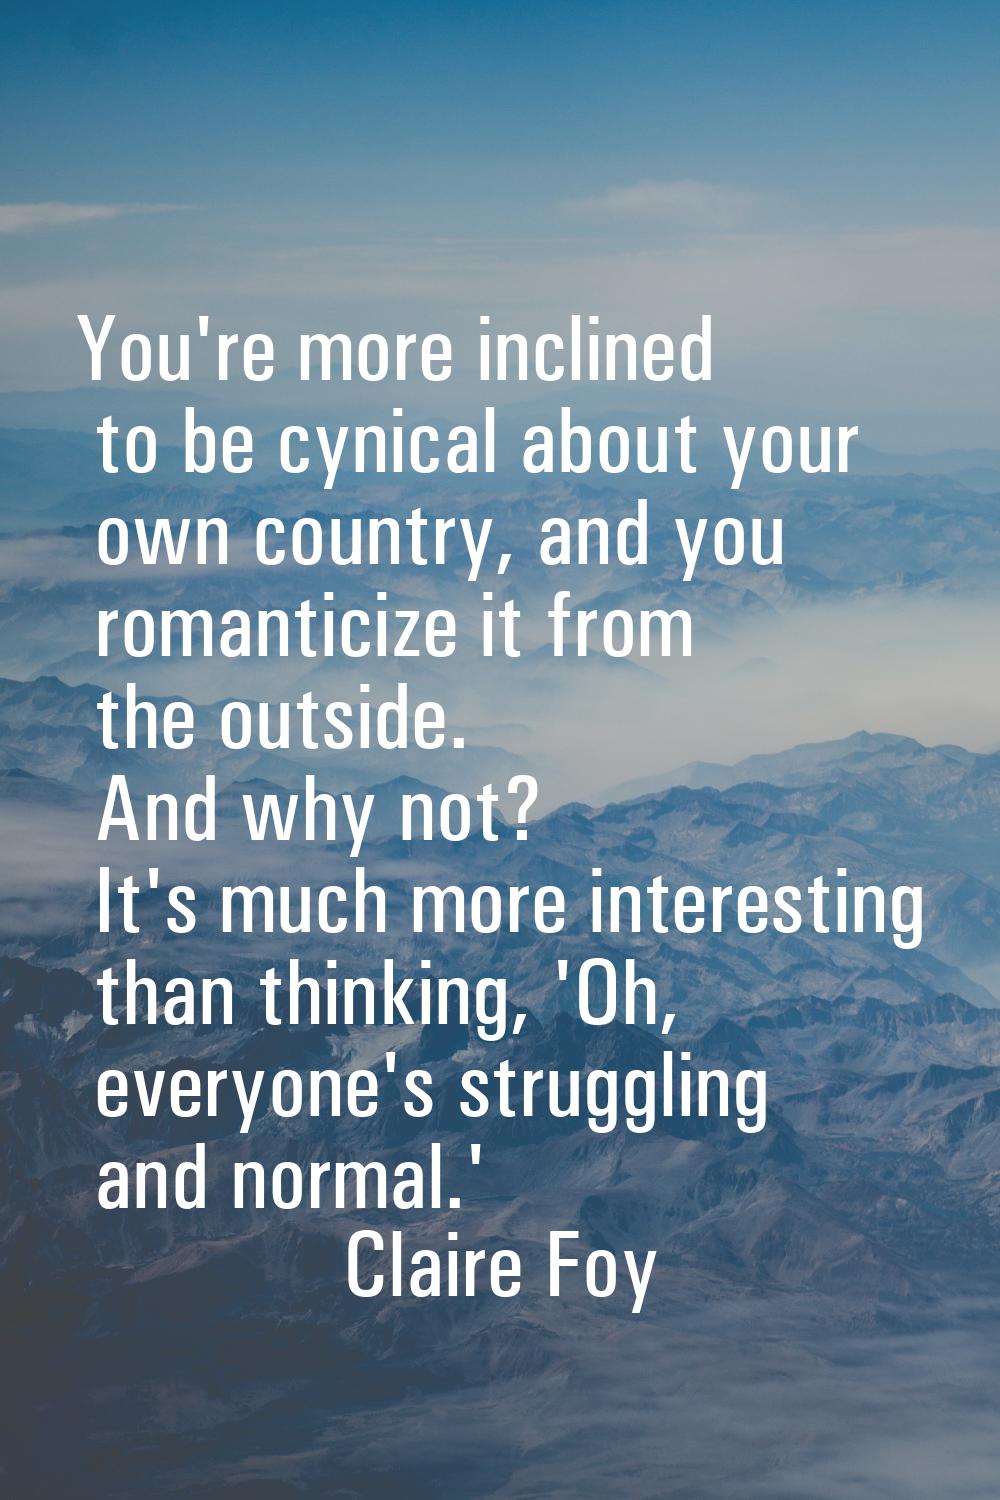 You're more inclined to be cynical about your own country, and you romanticize it from the outside.